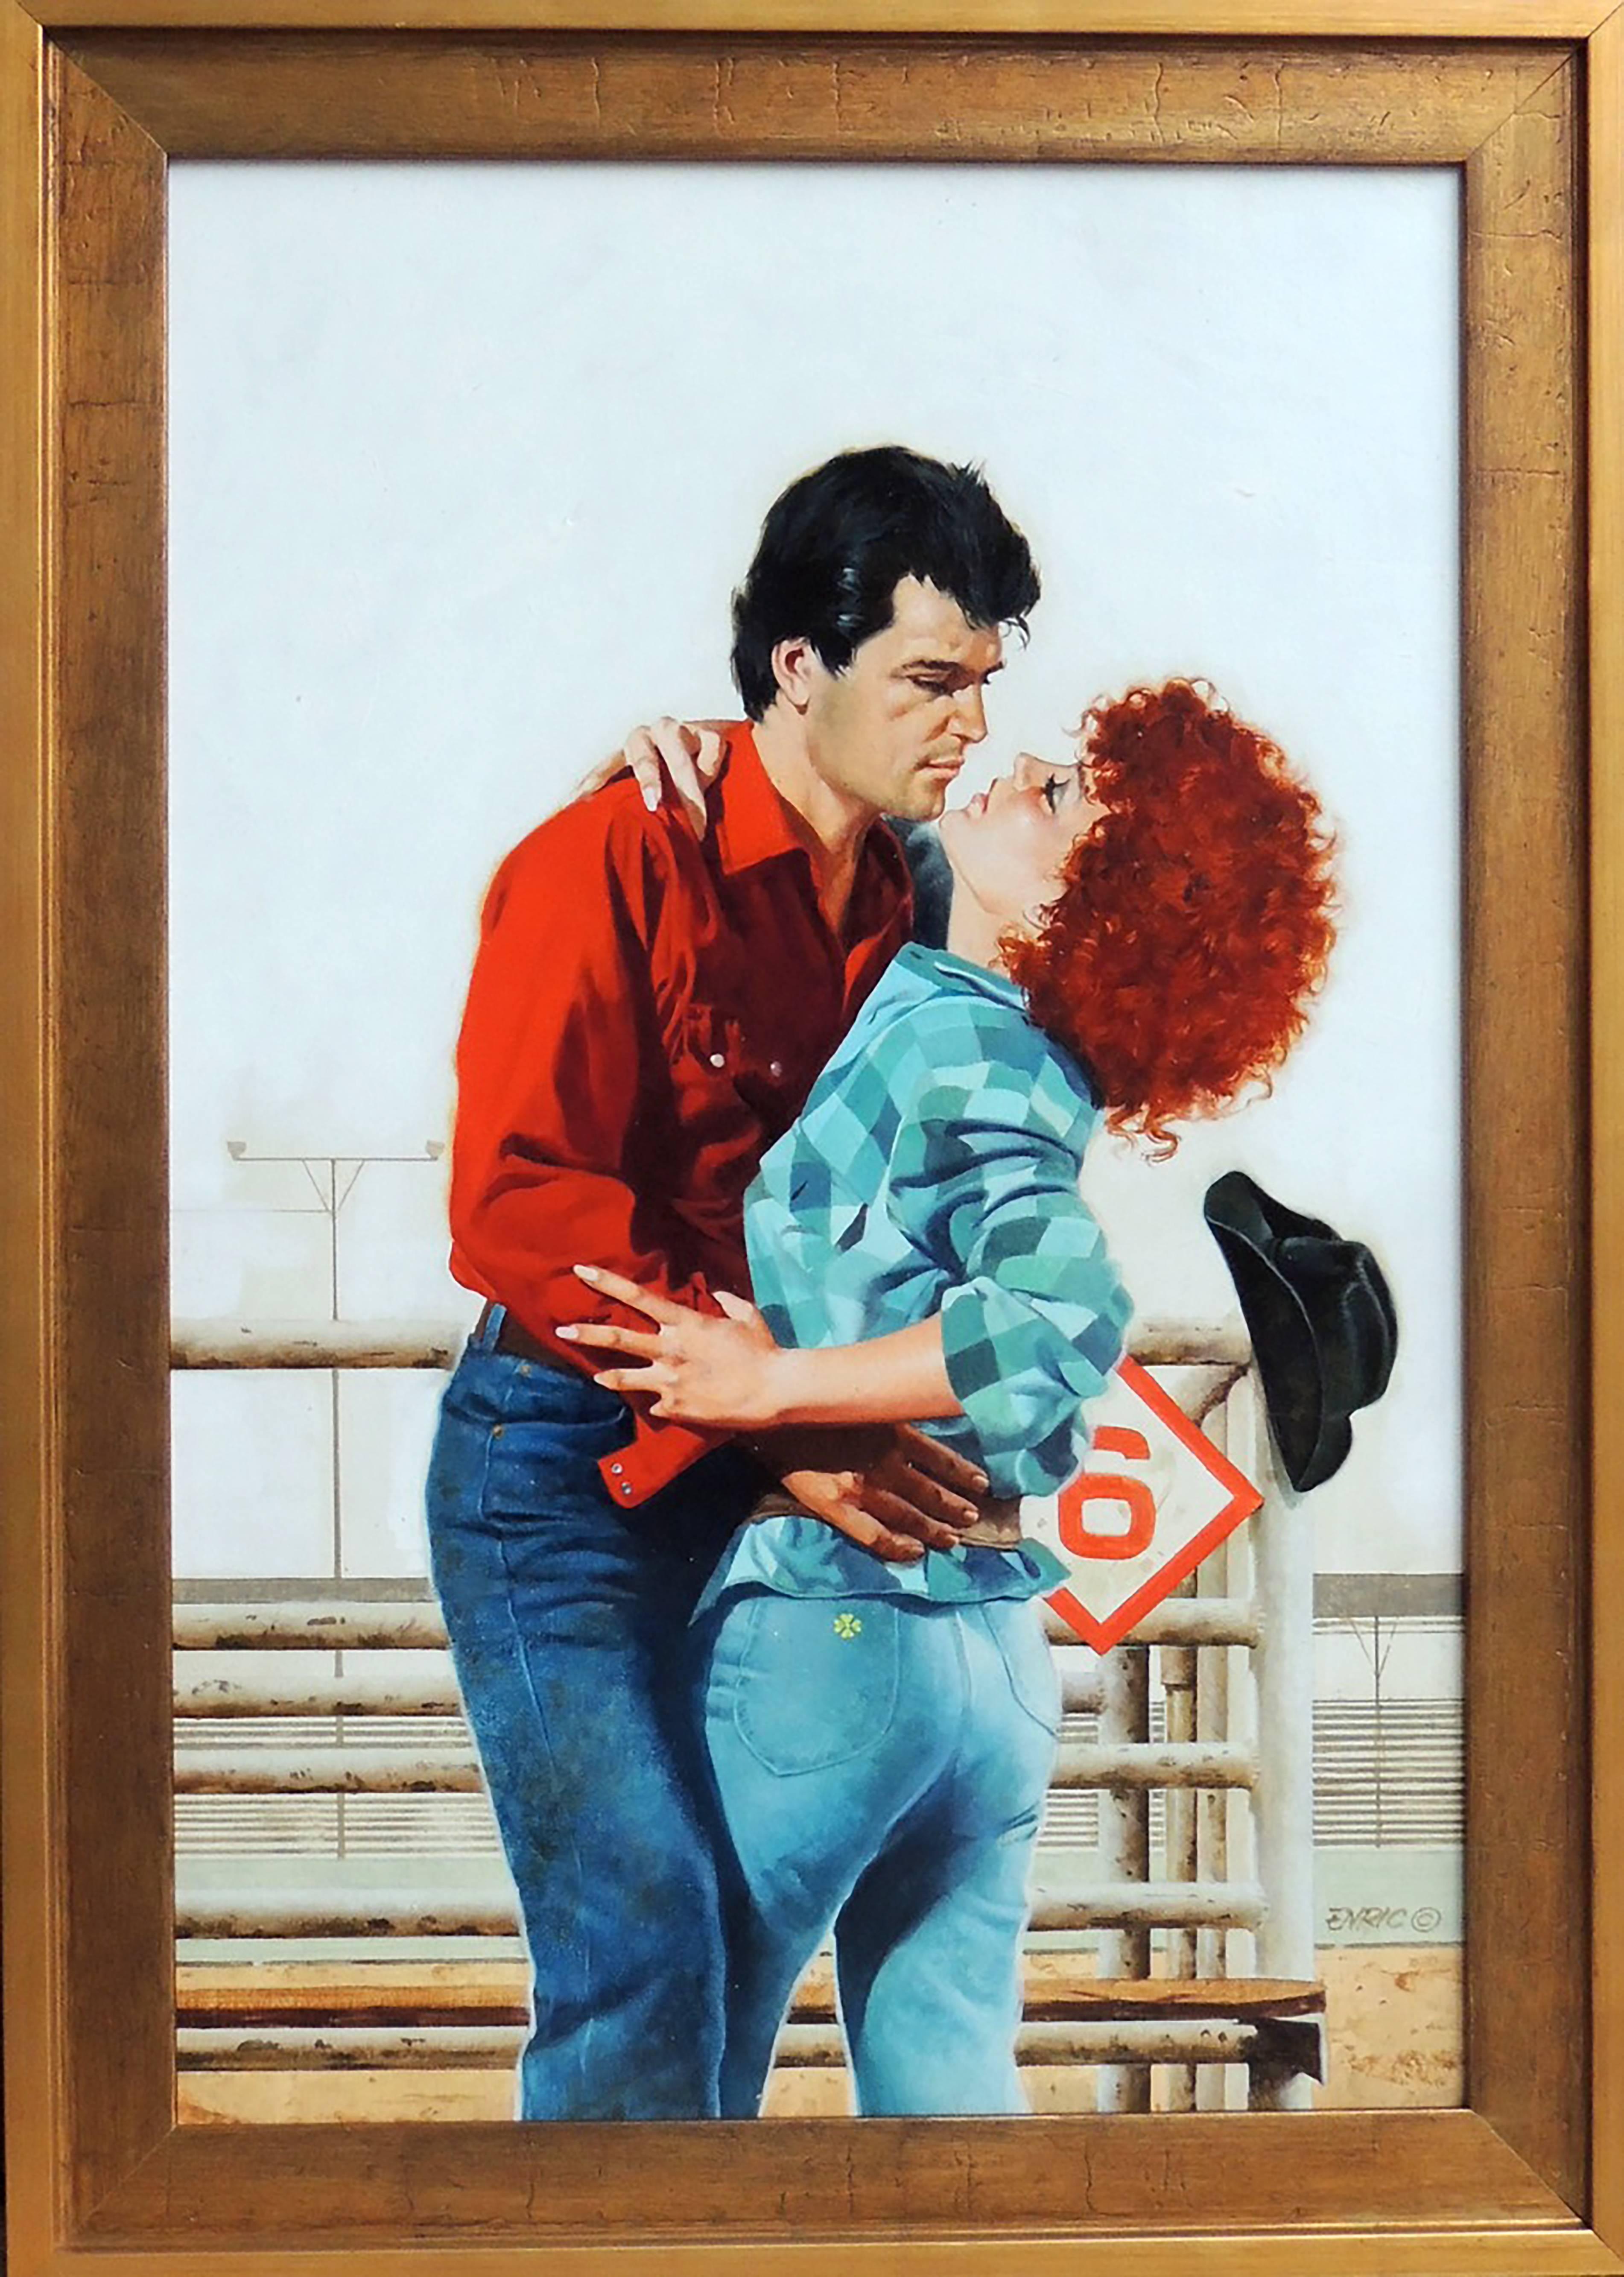 Romance Paperback Cover - Painting by Enrich Torres